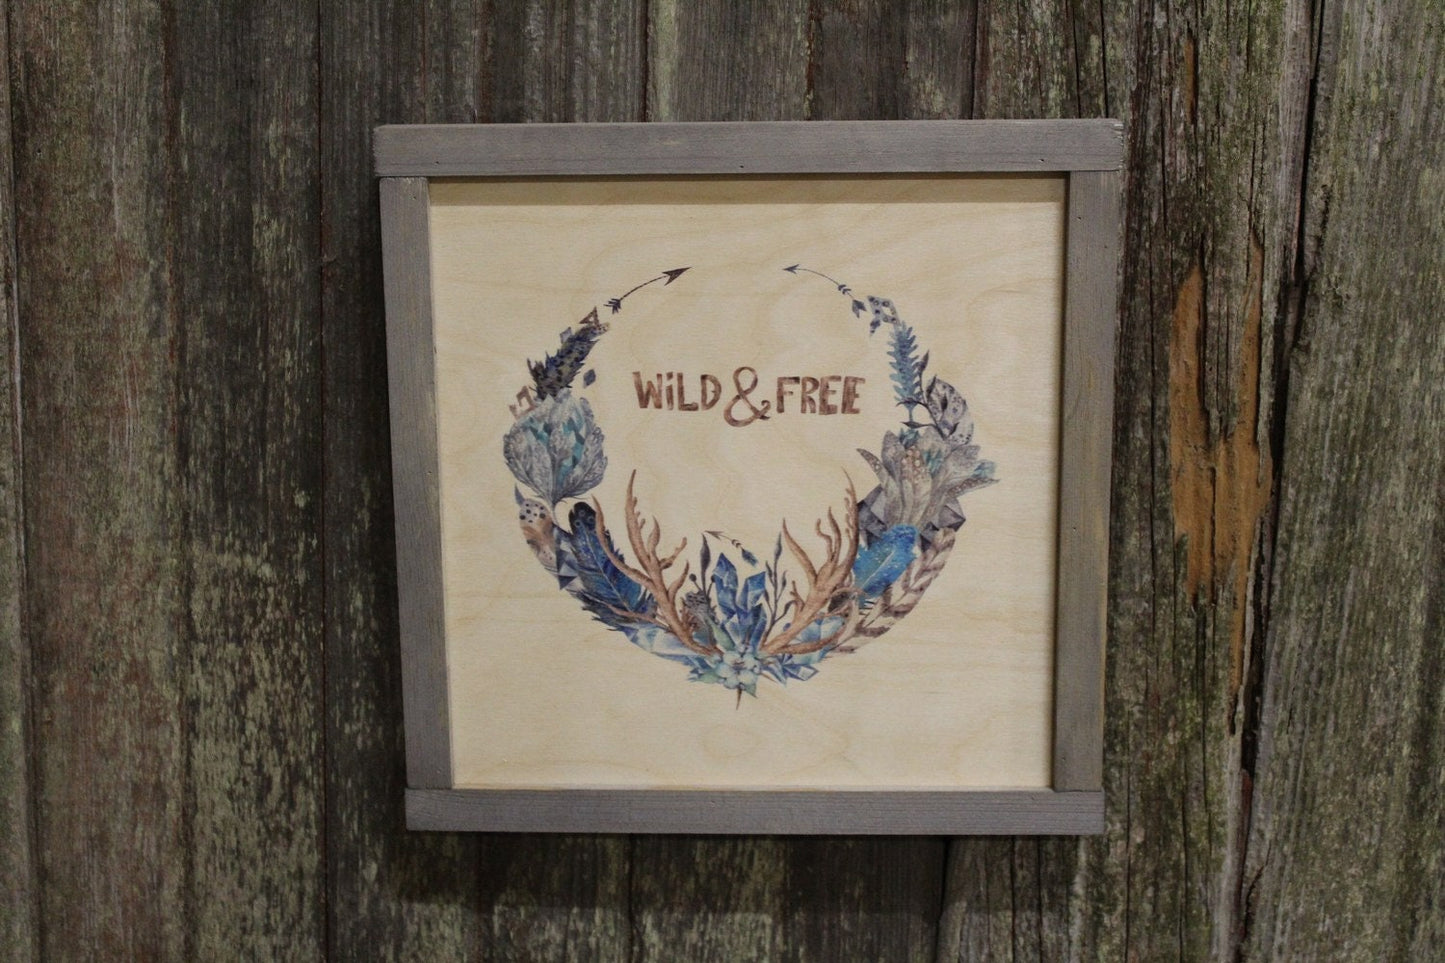 Framed Wild & Free Wood Sign Wreath Feathers Arrows Branches Rustic Text Decoration Print Wall Art Decor Farmhouse Primitive Wall Hanging